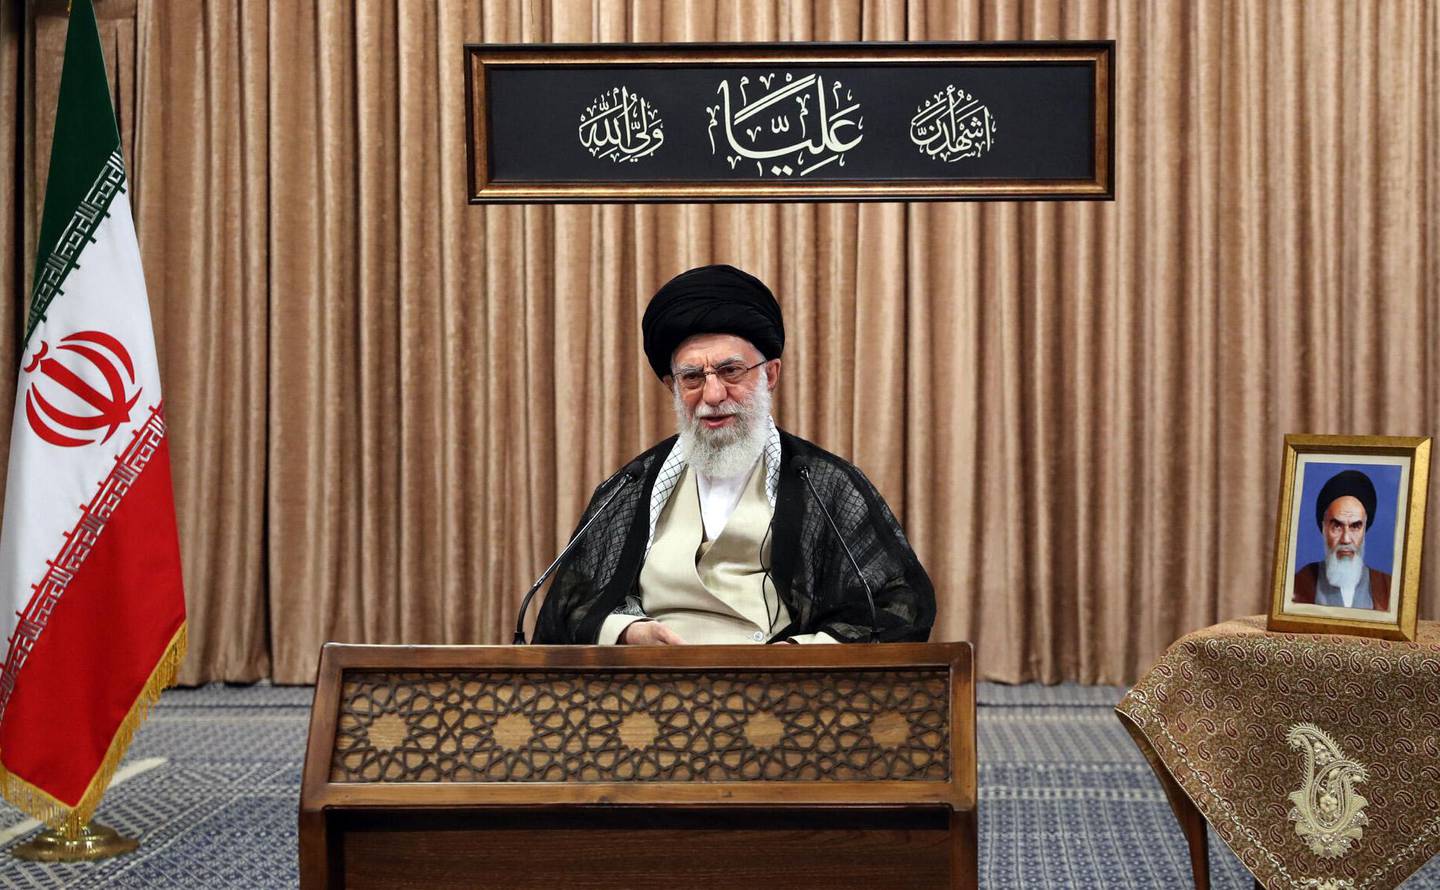 A handout picture provided by the office of Iran's Supreme Leader Ayatollah Ali Khamenei on May 2, 2021 shows him giving a live televised speech in the capital Tehran. Iran's supreme leader slammed as a "big mistake" leaked remarks by his foreign minister, a week after audio emerged of the diplomat bemoaning the military's influence on diplomacy. Top diplomat Mohammad Javad Zarif made the remarks in a three-hour conversation first published by media outlets outside the country a week ago, provoking anger from conservatives. - === RESTRICTED TO EDITORIAL USE - MANDATORY CREDIT "AFP PHOTO / HO / KHAMENEI.IR" - NO MARKETING NO ADVERTISING CAMPAIGNS - DISTRIBUTED AS A SERVICE TO CLIENTS ===
 / AFP / KHAMENEI.IR / - / === RESTRICTED TO EDITORIAL USE - MANDATORY CREDIT "AFP PHOTO / HO / KHAMENEI.IR" - NO MARKETING NO ADVERTISING CAMPAIGNS - DISTRIBUTED AS A SERVICE TO CLIENTS ===
